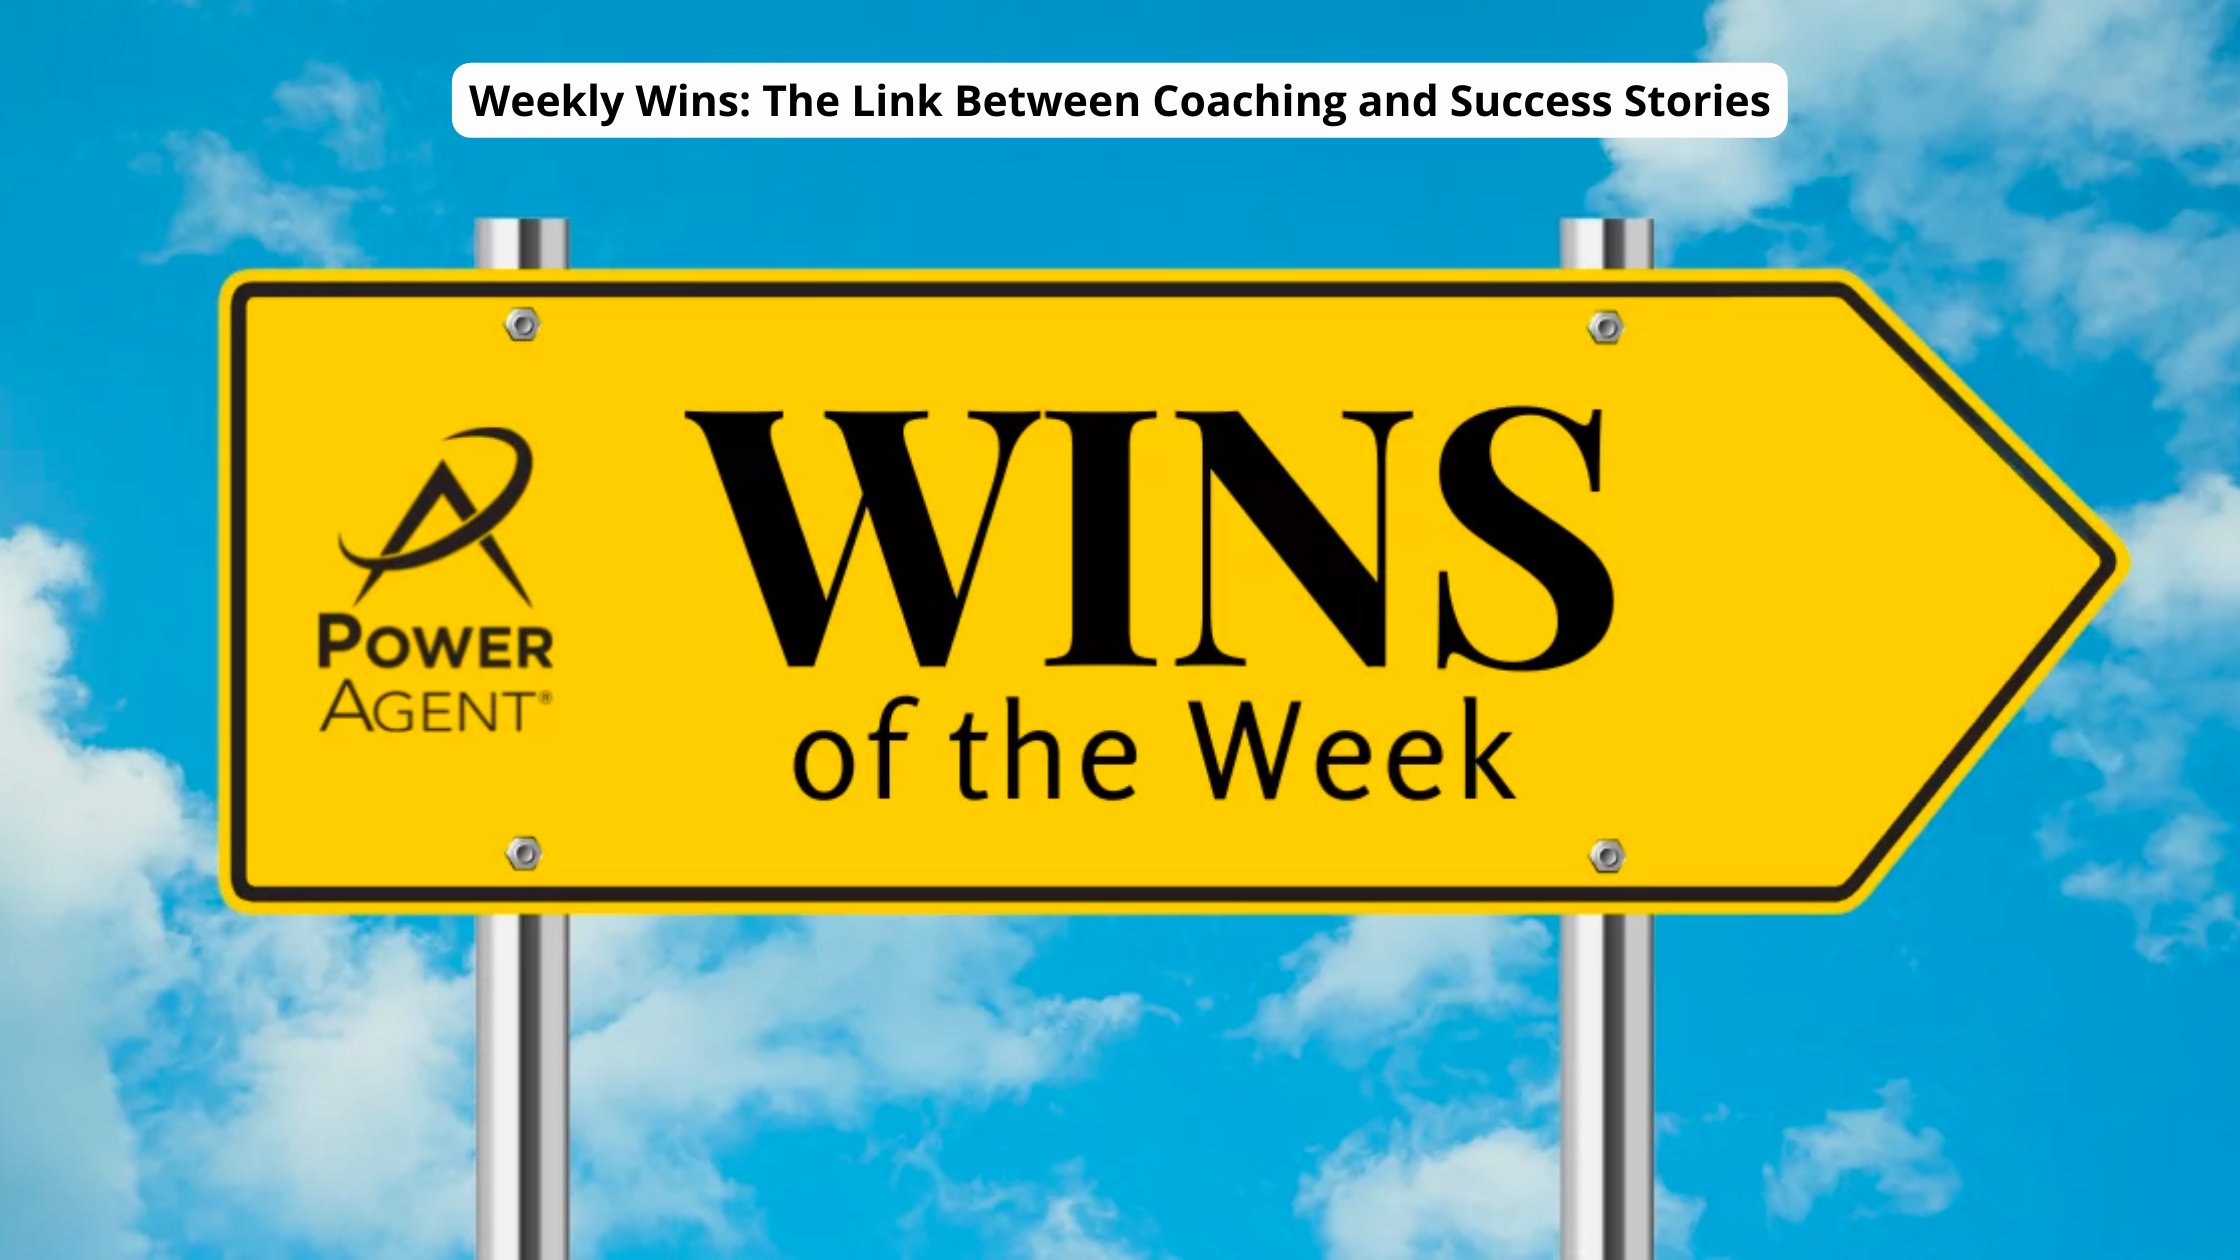 Weekly Wins: The Link Between Coaching and Success Stories